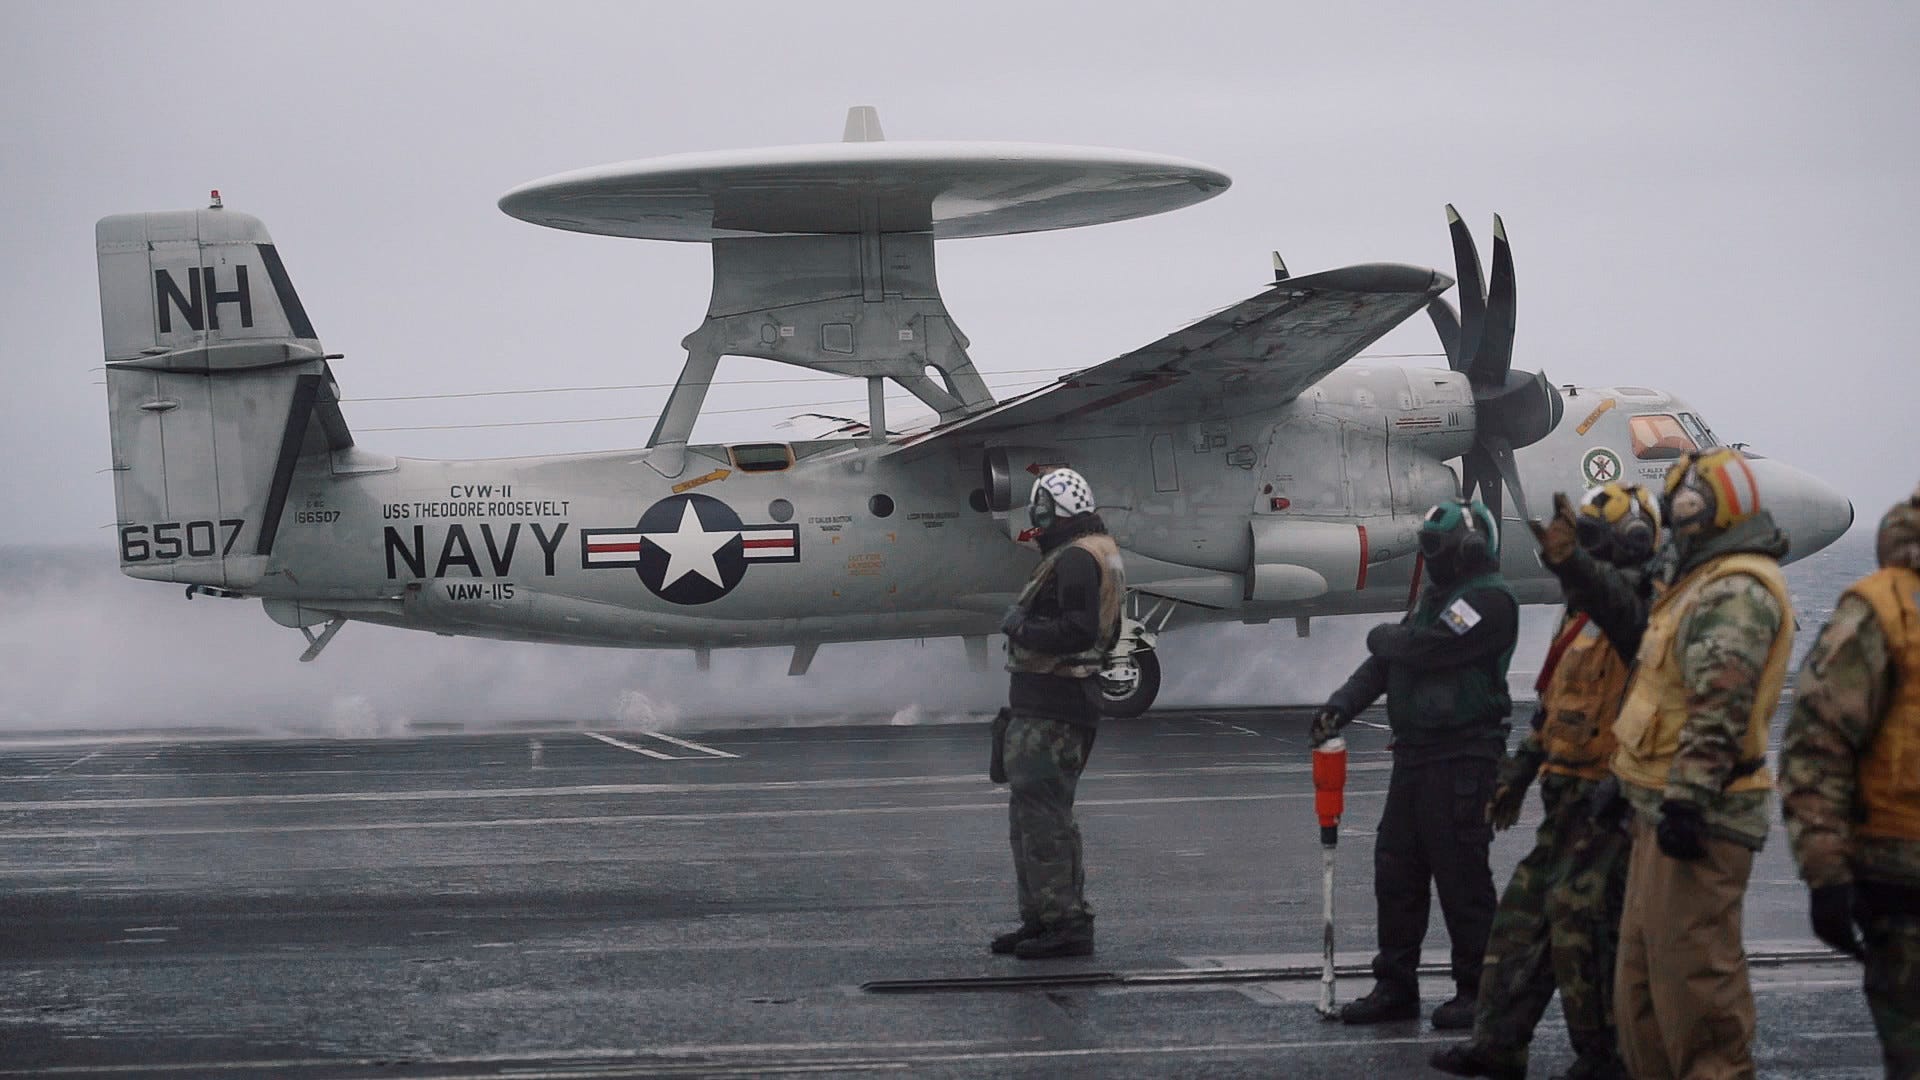 E-2C Hawkeye launches from USS Theodore Roosevelt aircraft carrier